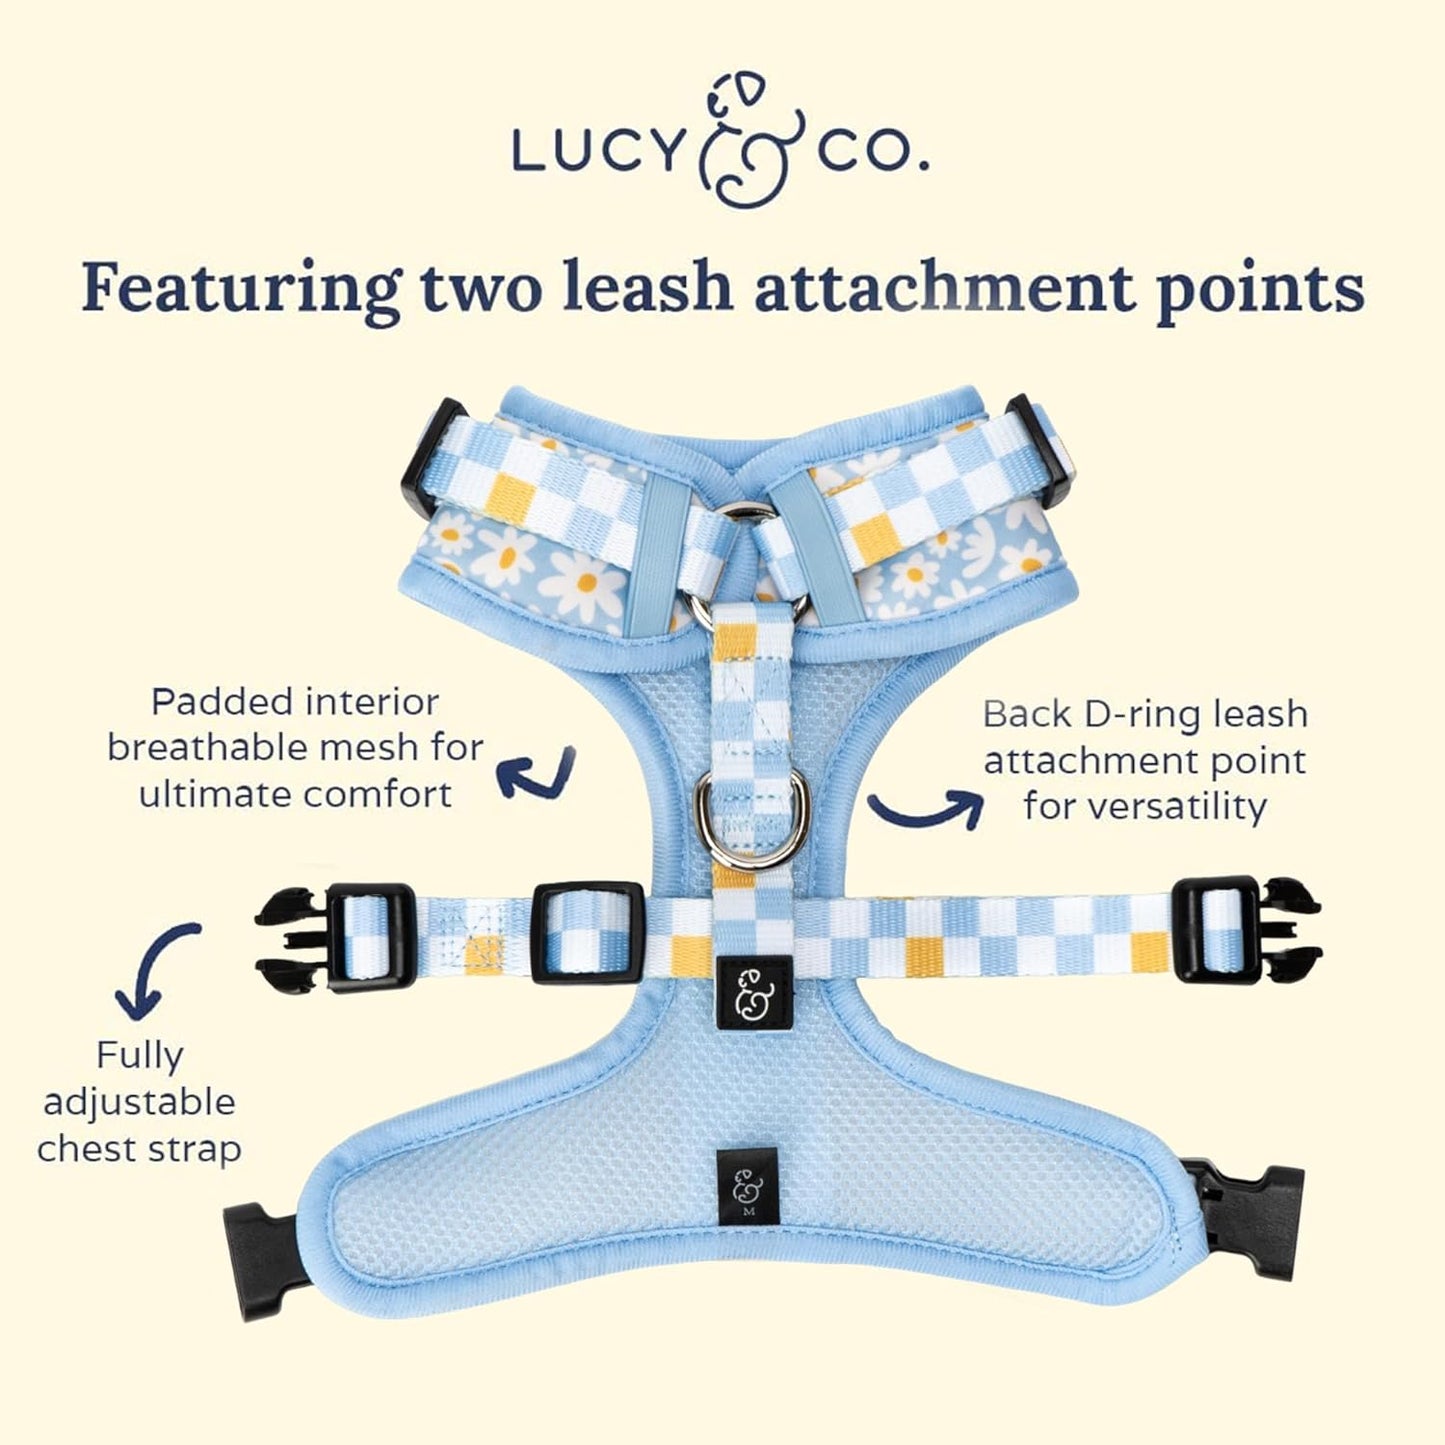 The Simply Splendid No-Pull Harness